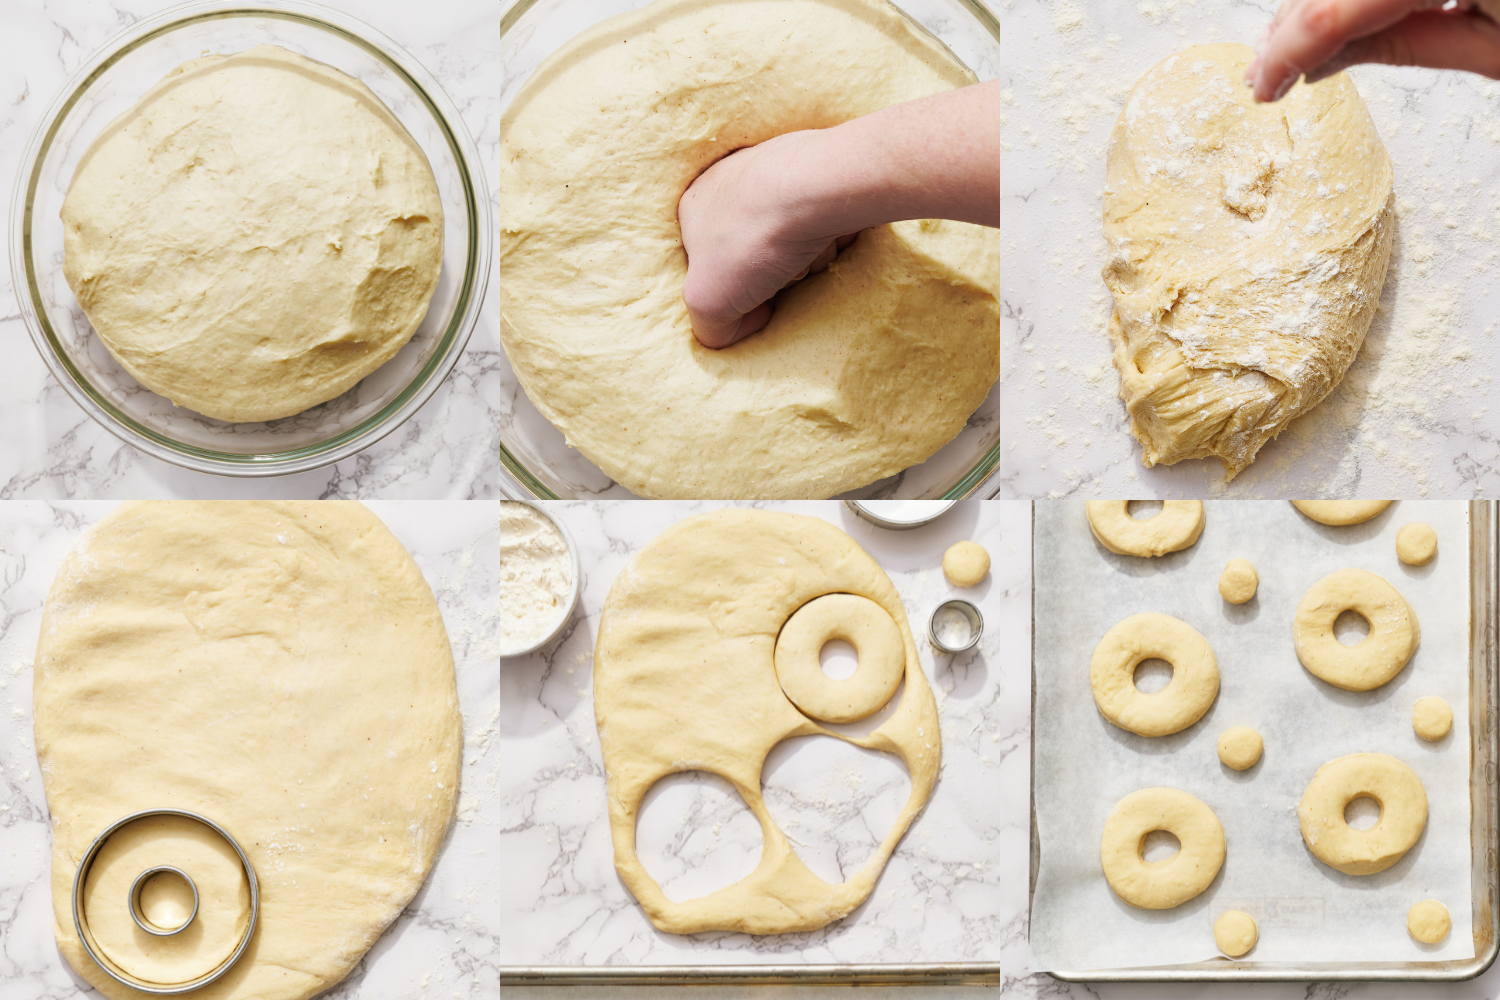 collage of images showing how to roll out and cut out the doughnut dough before rising and frying.